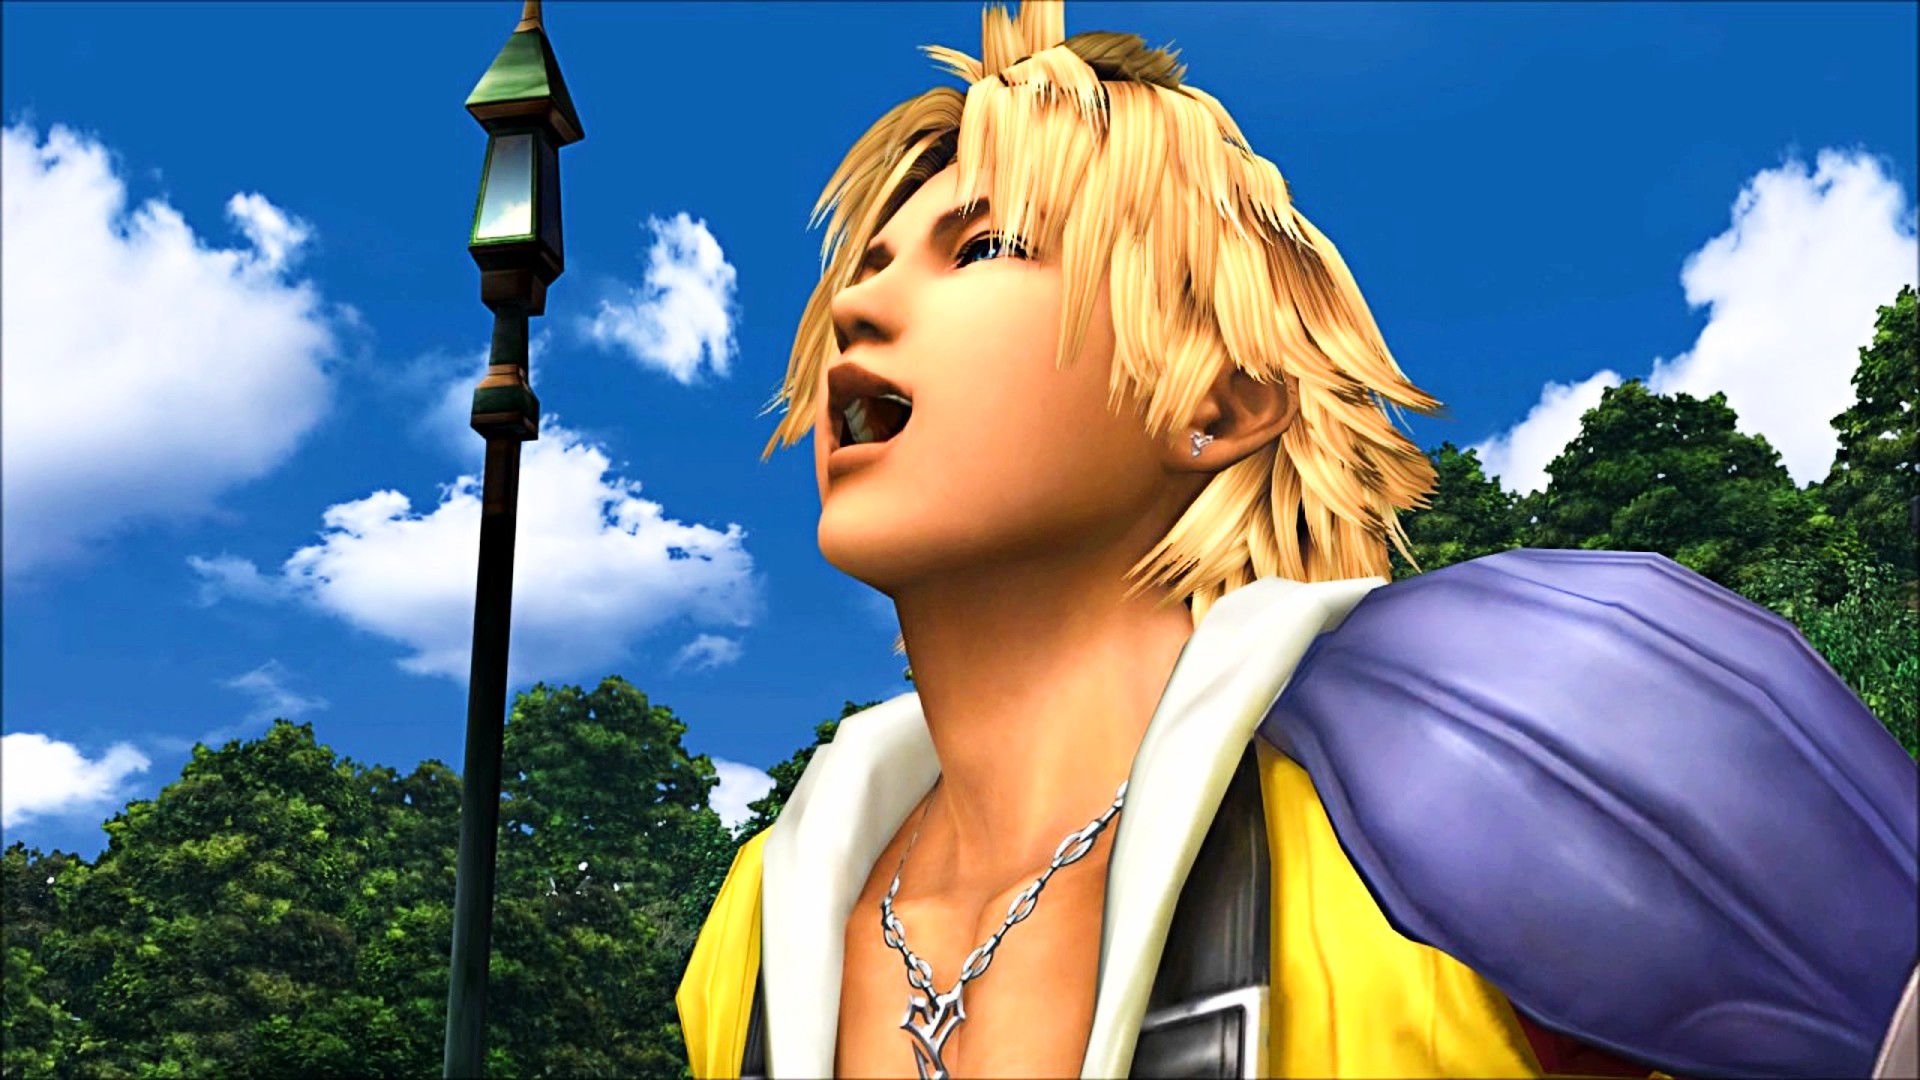 Final Fantasy X’s Tidus could have been a plumber